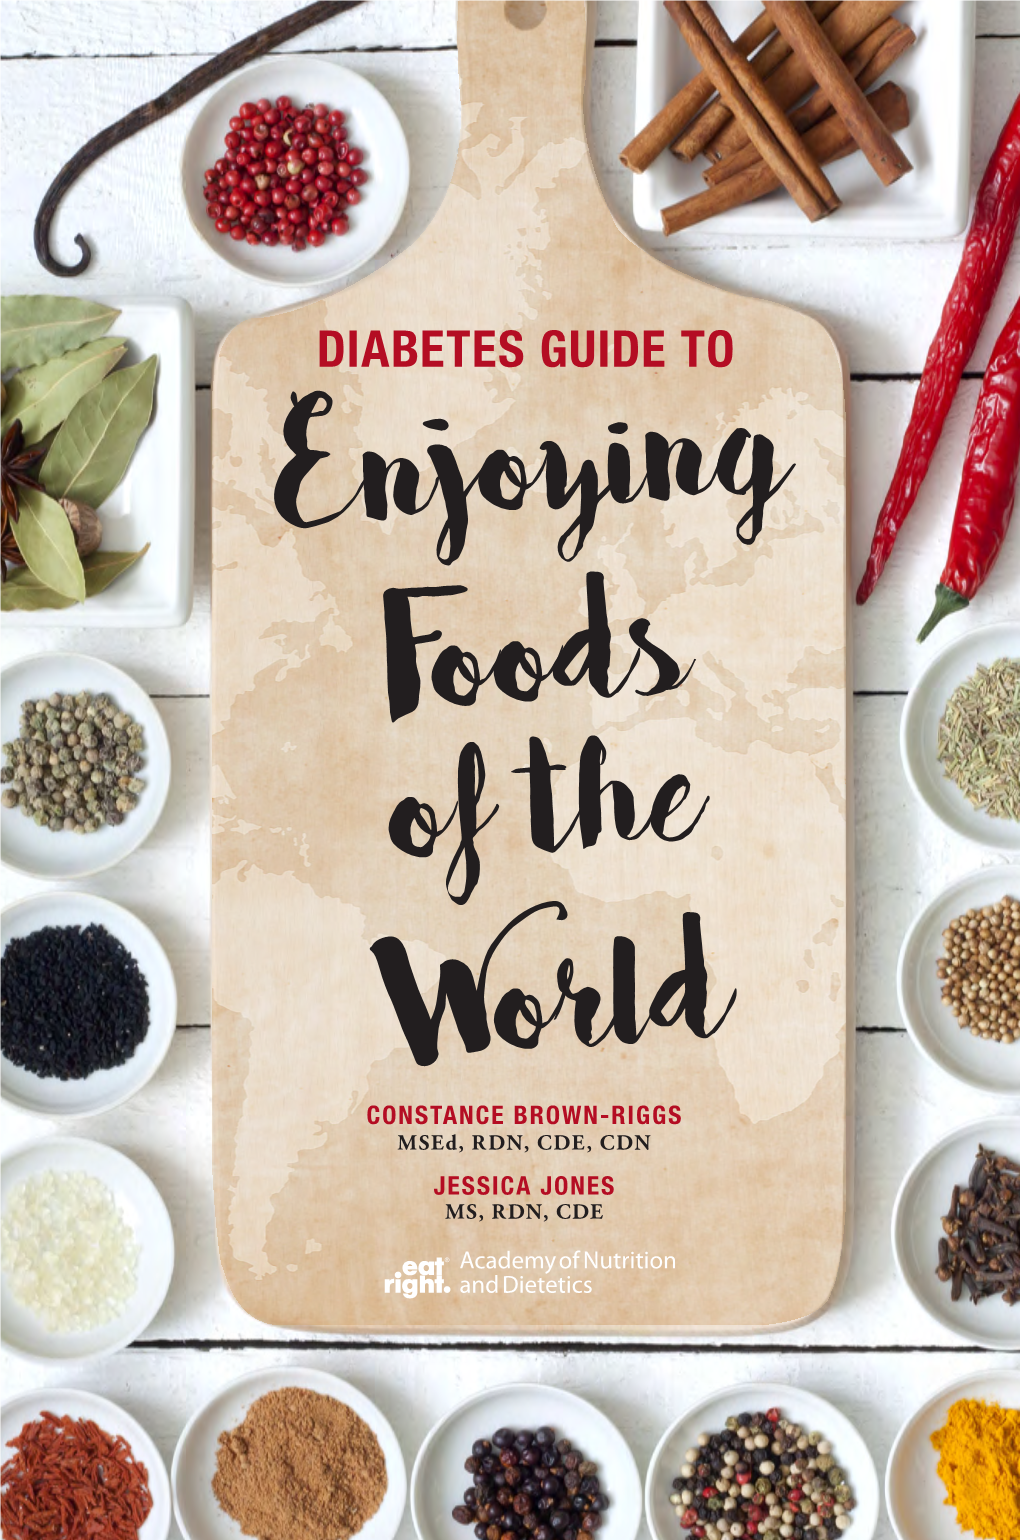 DIABETES GUIDE to Enjoying Foods of The